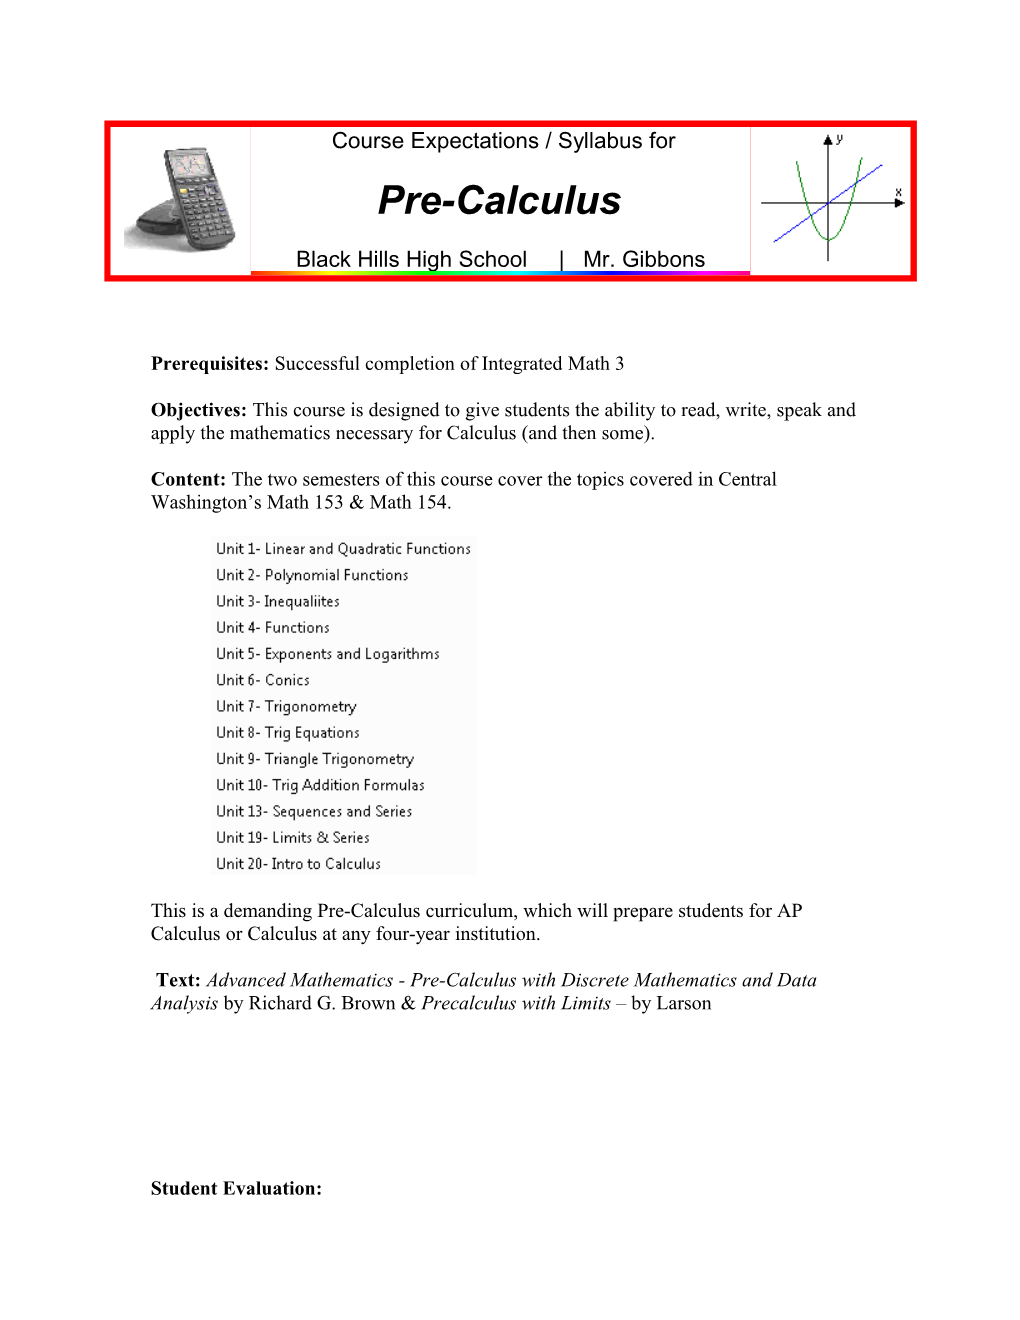 Prerequisites: Successful Completion of Integrated Math 3